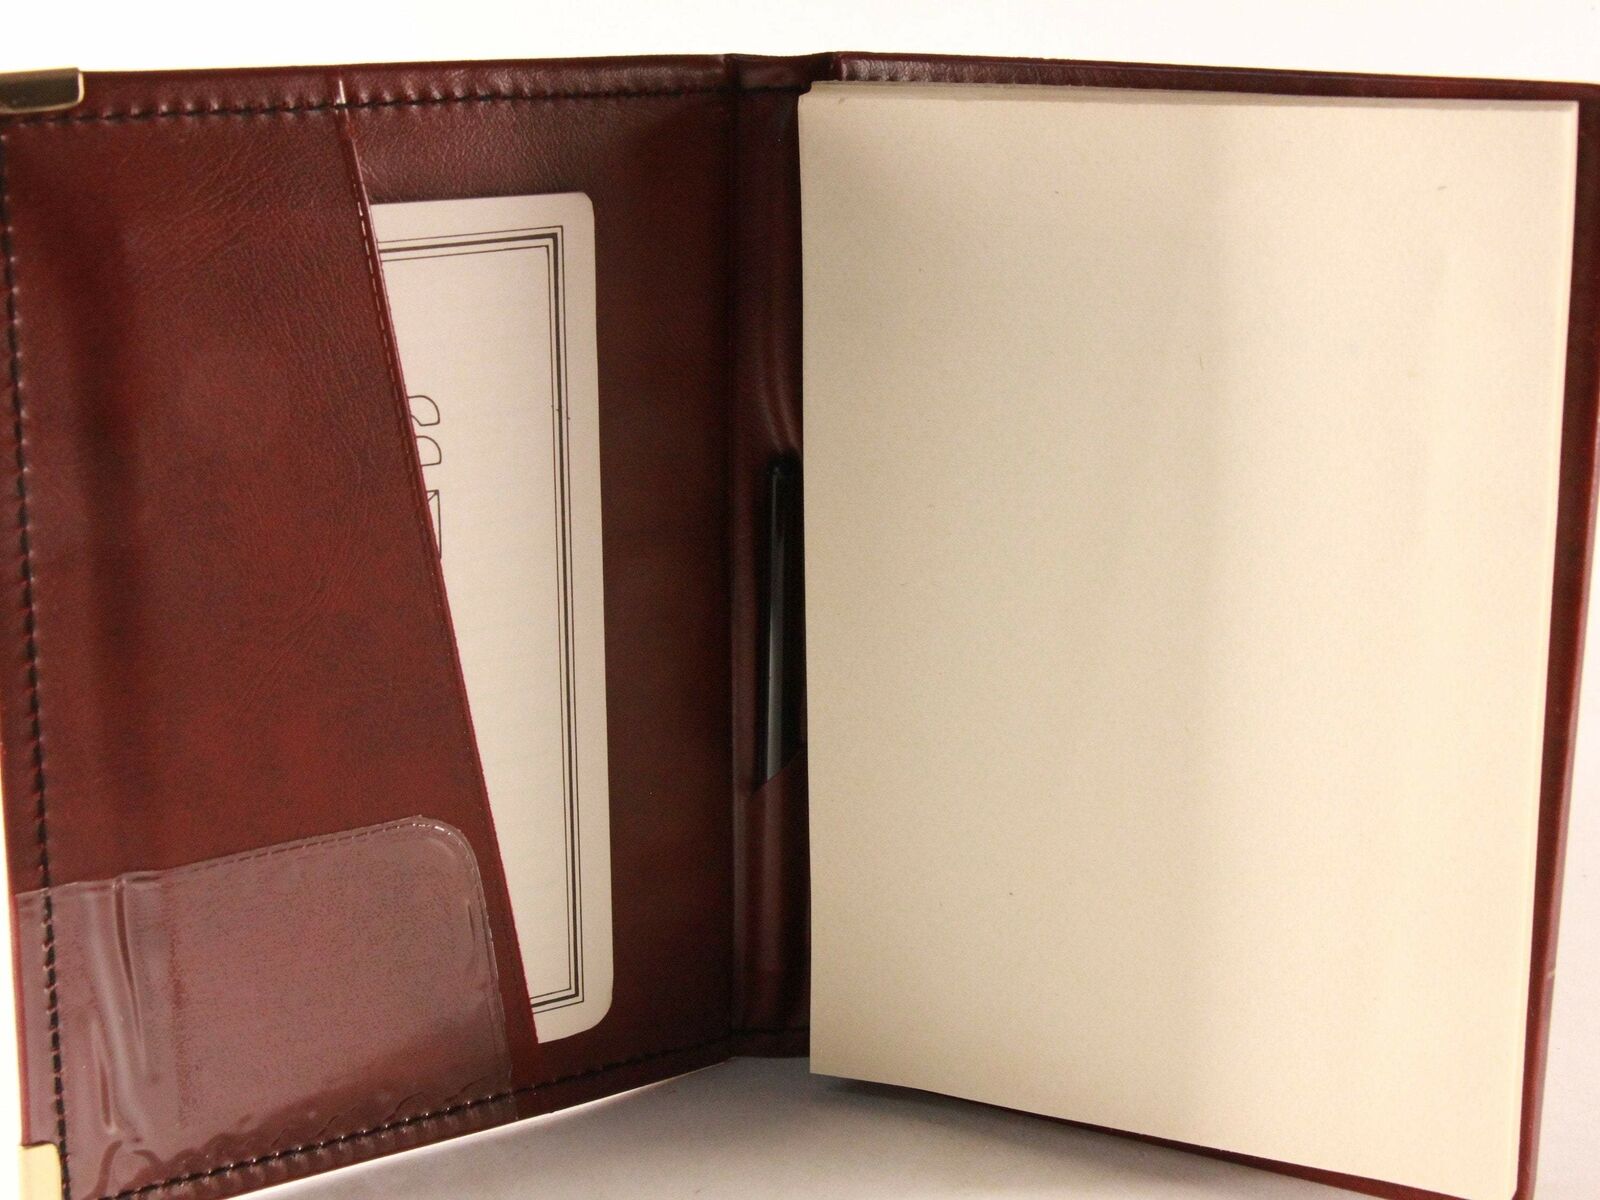 Note Pad Holder Set. Burgundy Faux Leather